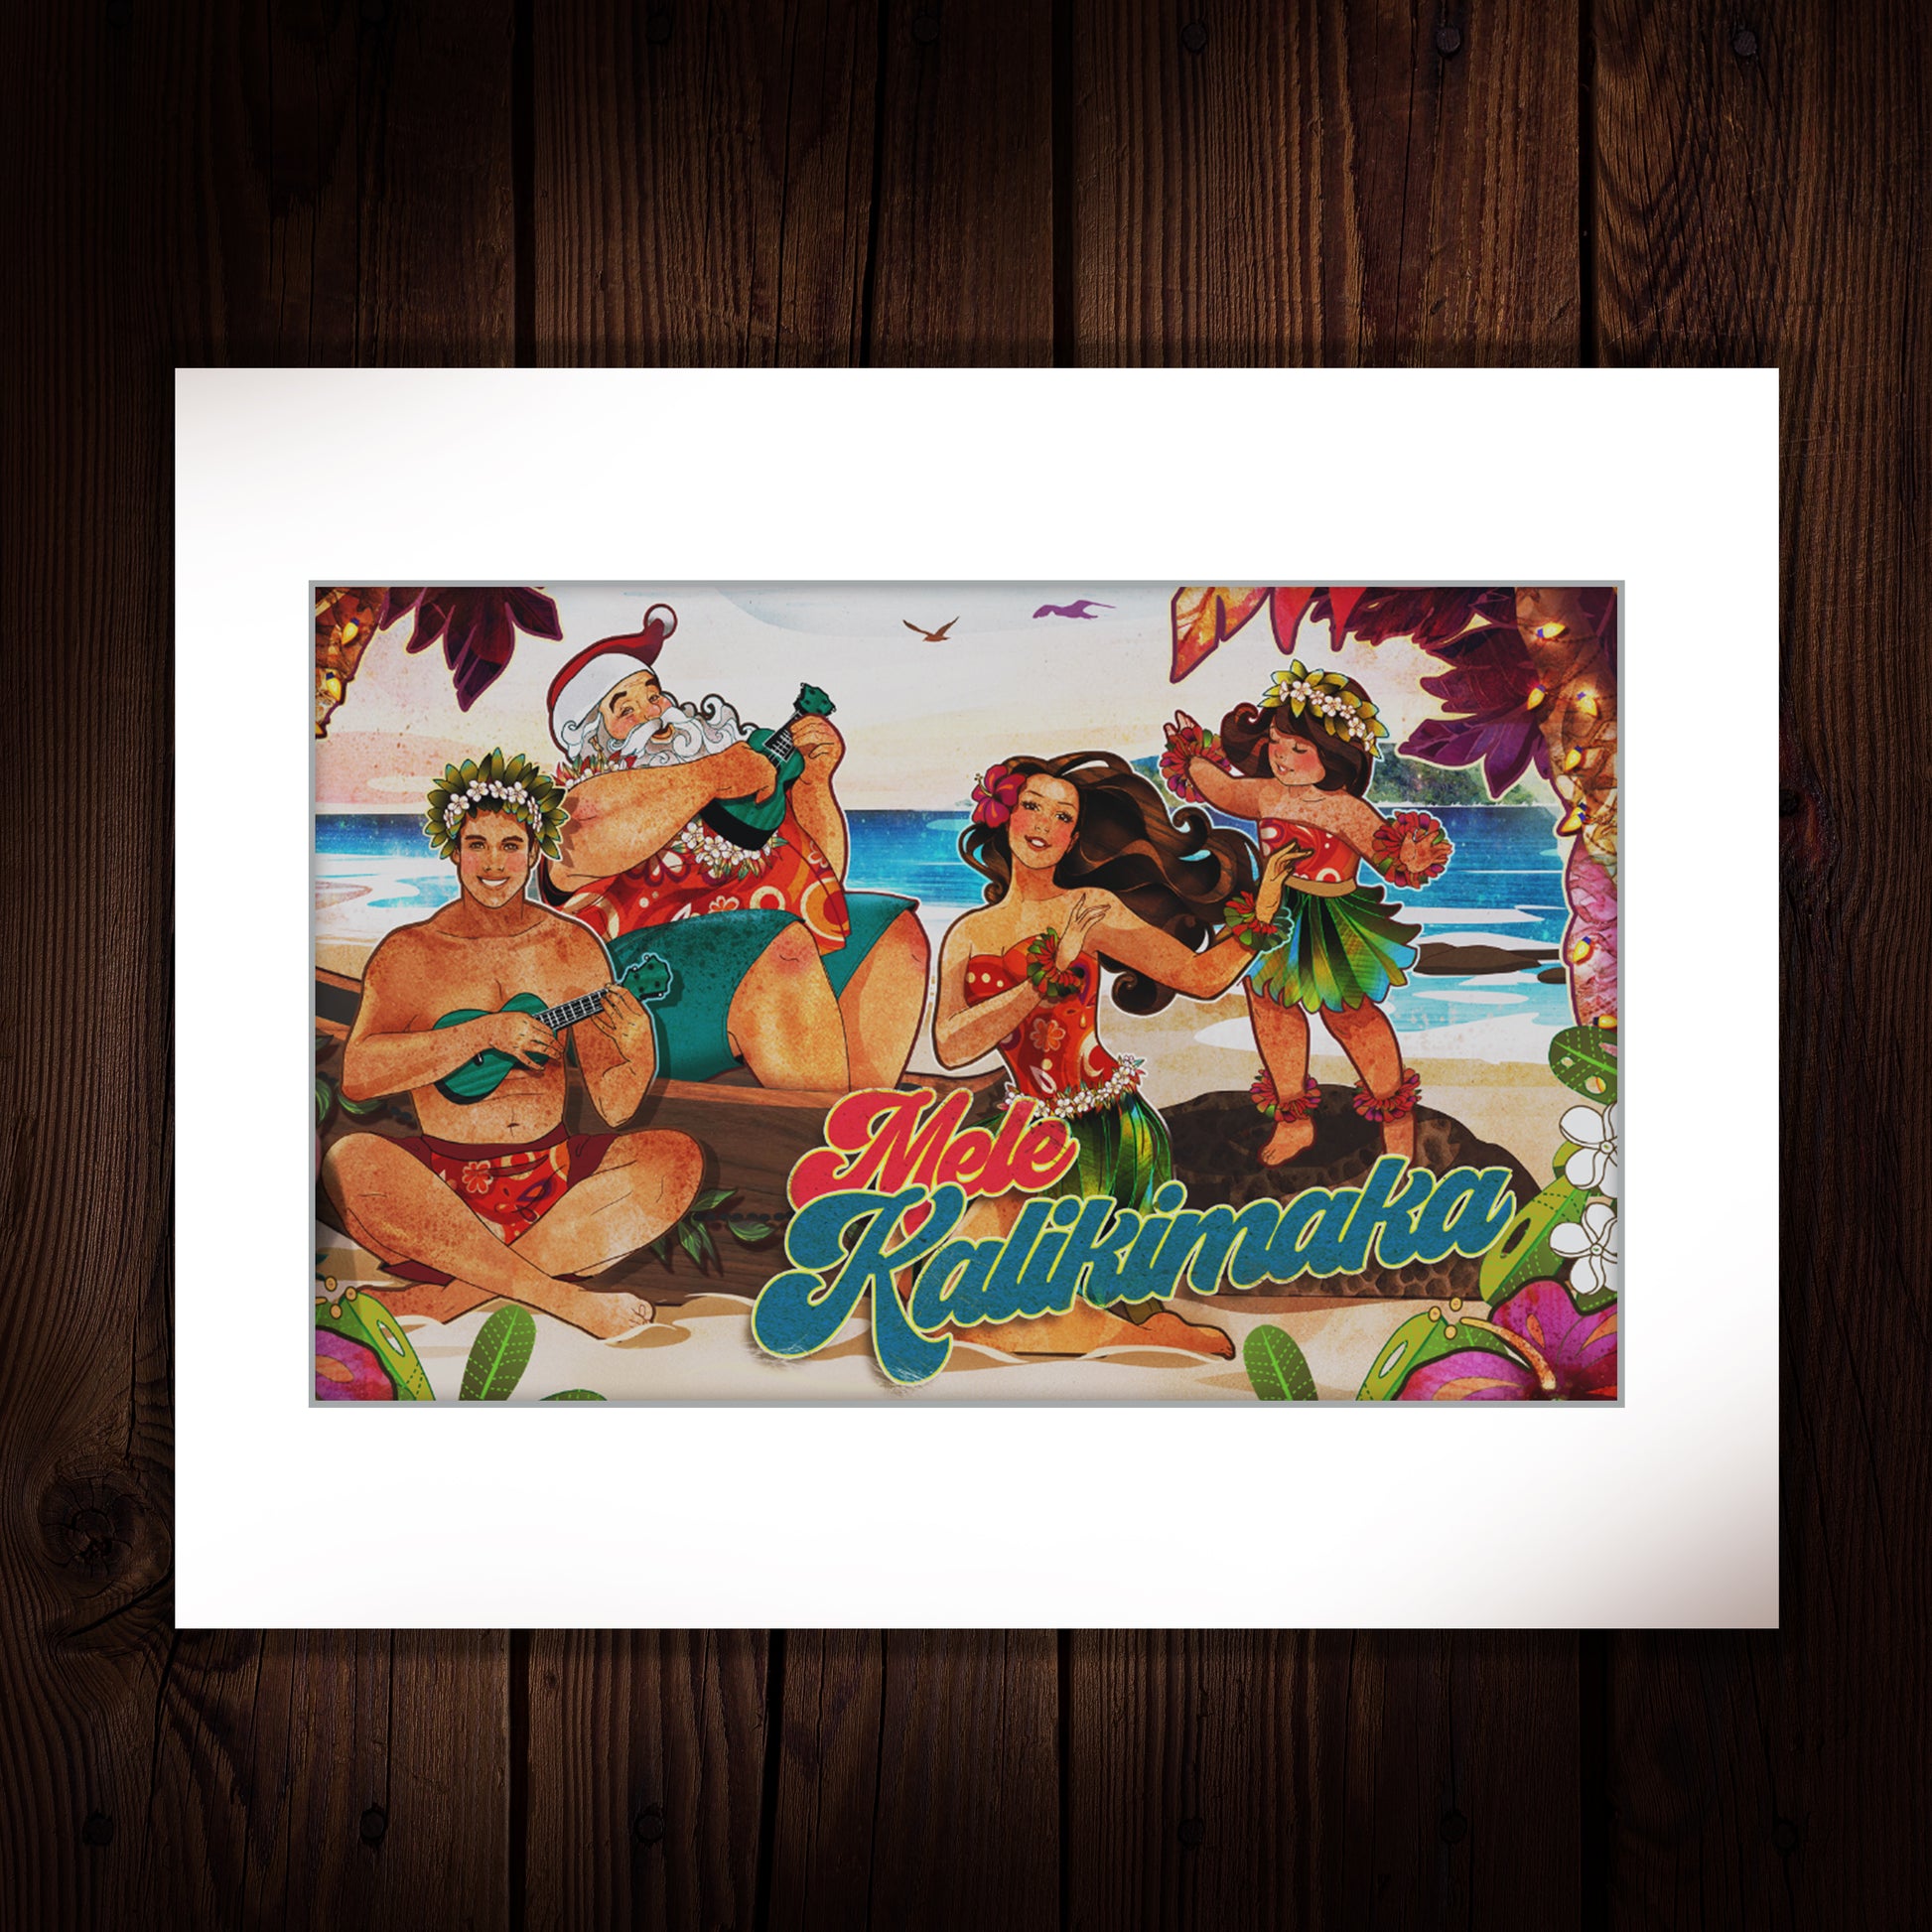 matted print of an illustration of a hawaiian family dancing hula at the beach with Santa joining them. Image is framed by red palm trees with christmas lights and the words "mele kalikimaka"